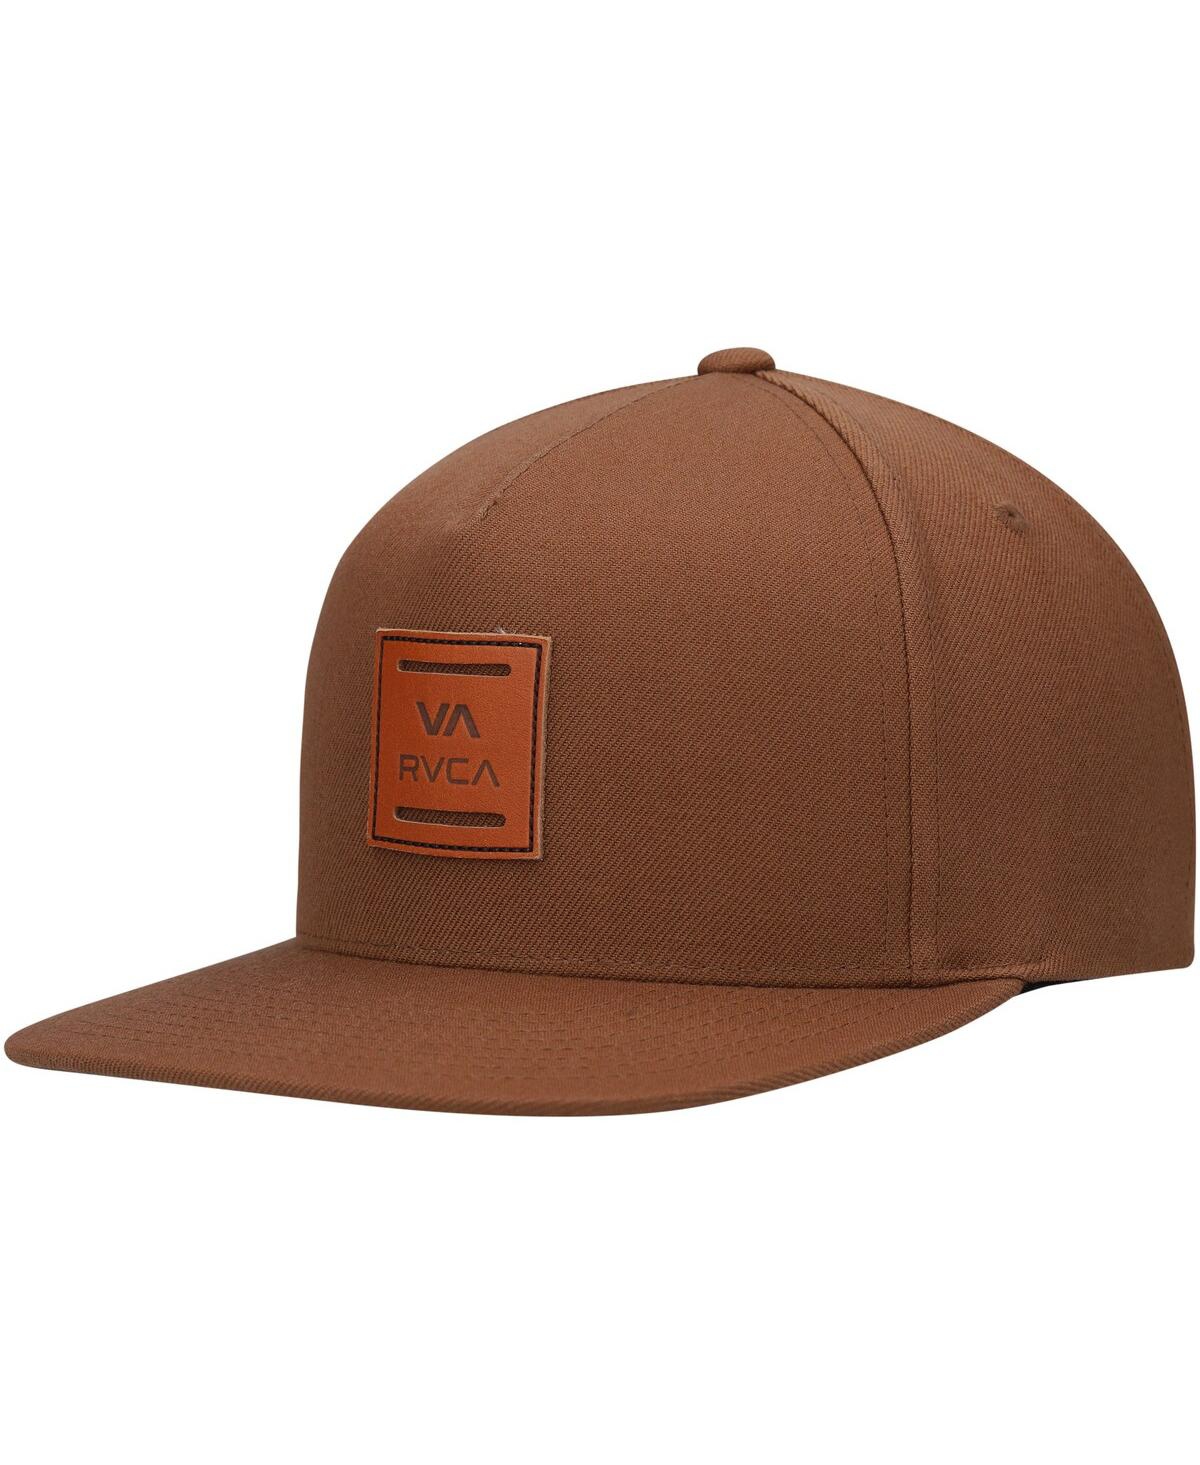 Rvca Men's  Brown All The Way Snapback Hat